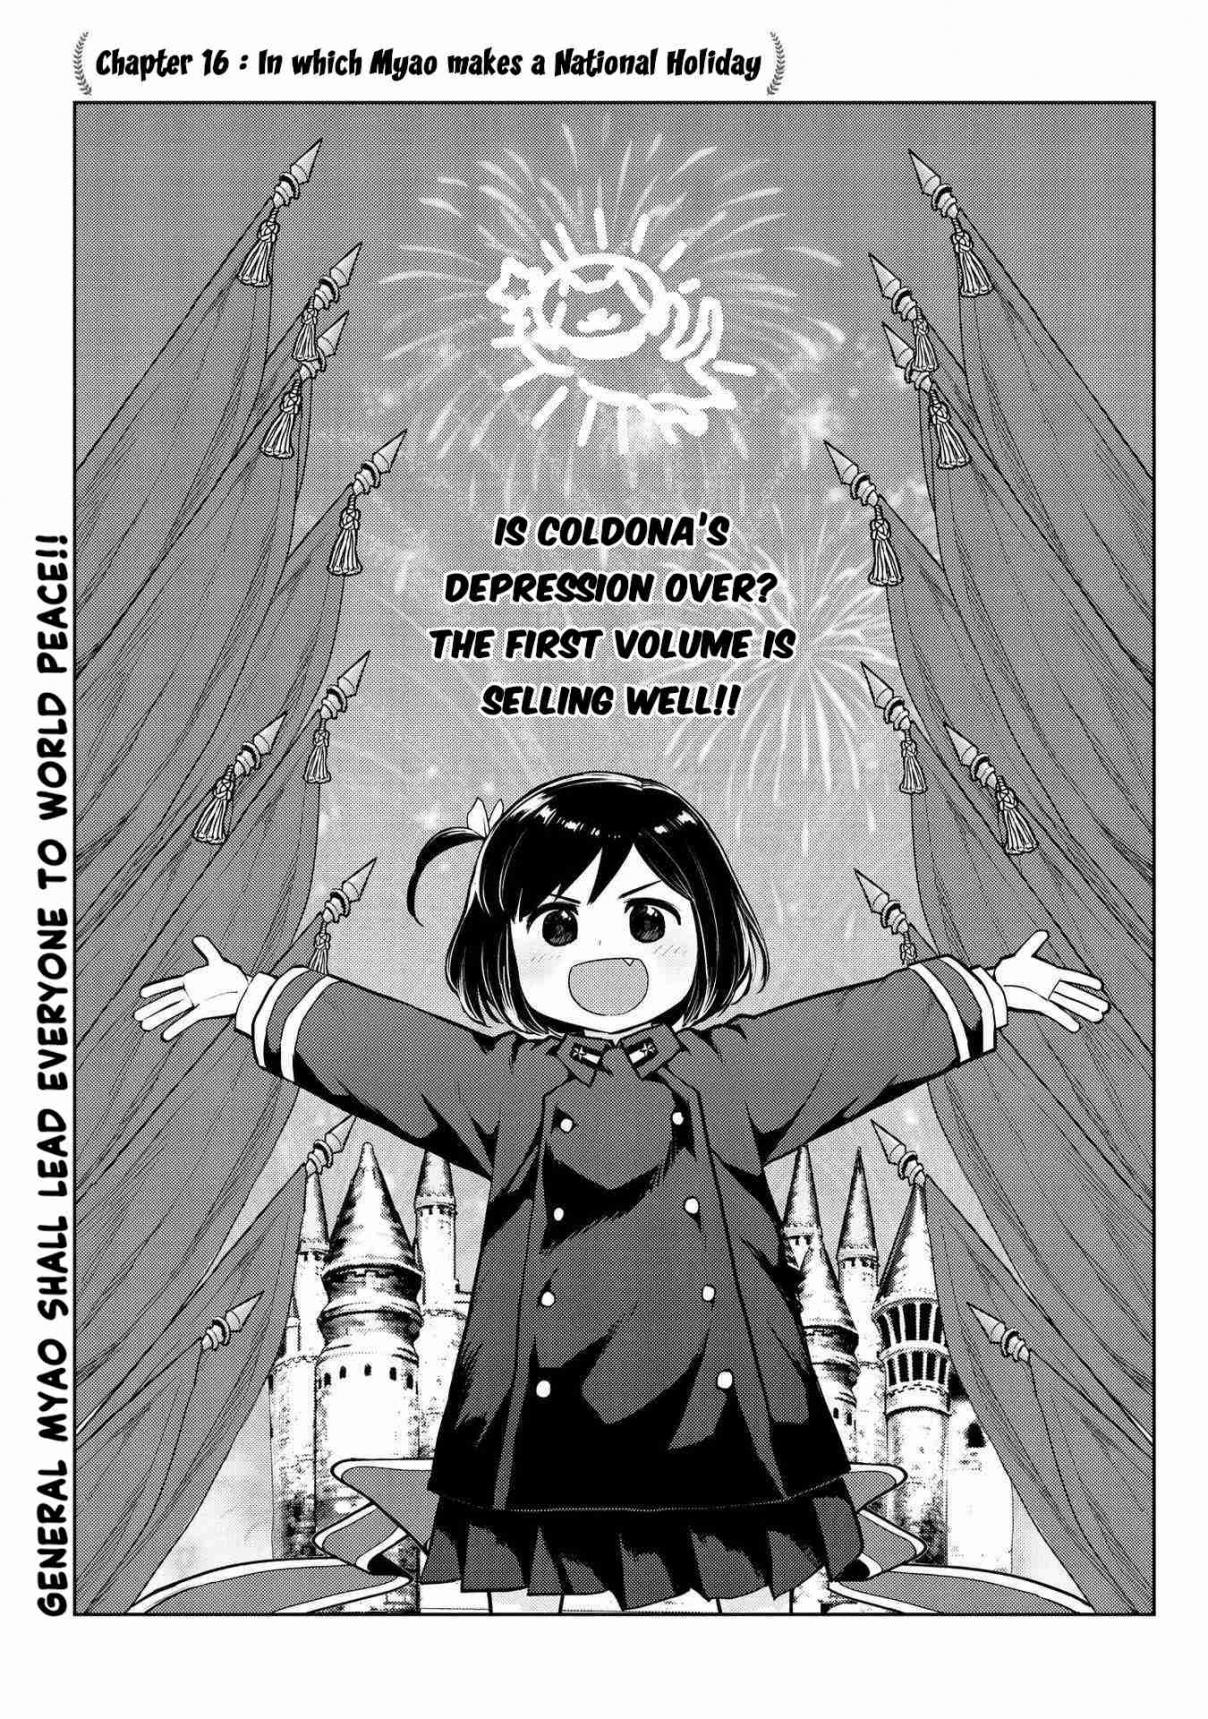 Oh, Our General Myao Vol. 2 Ch. 16 In which Myao makes a national holiday